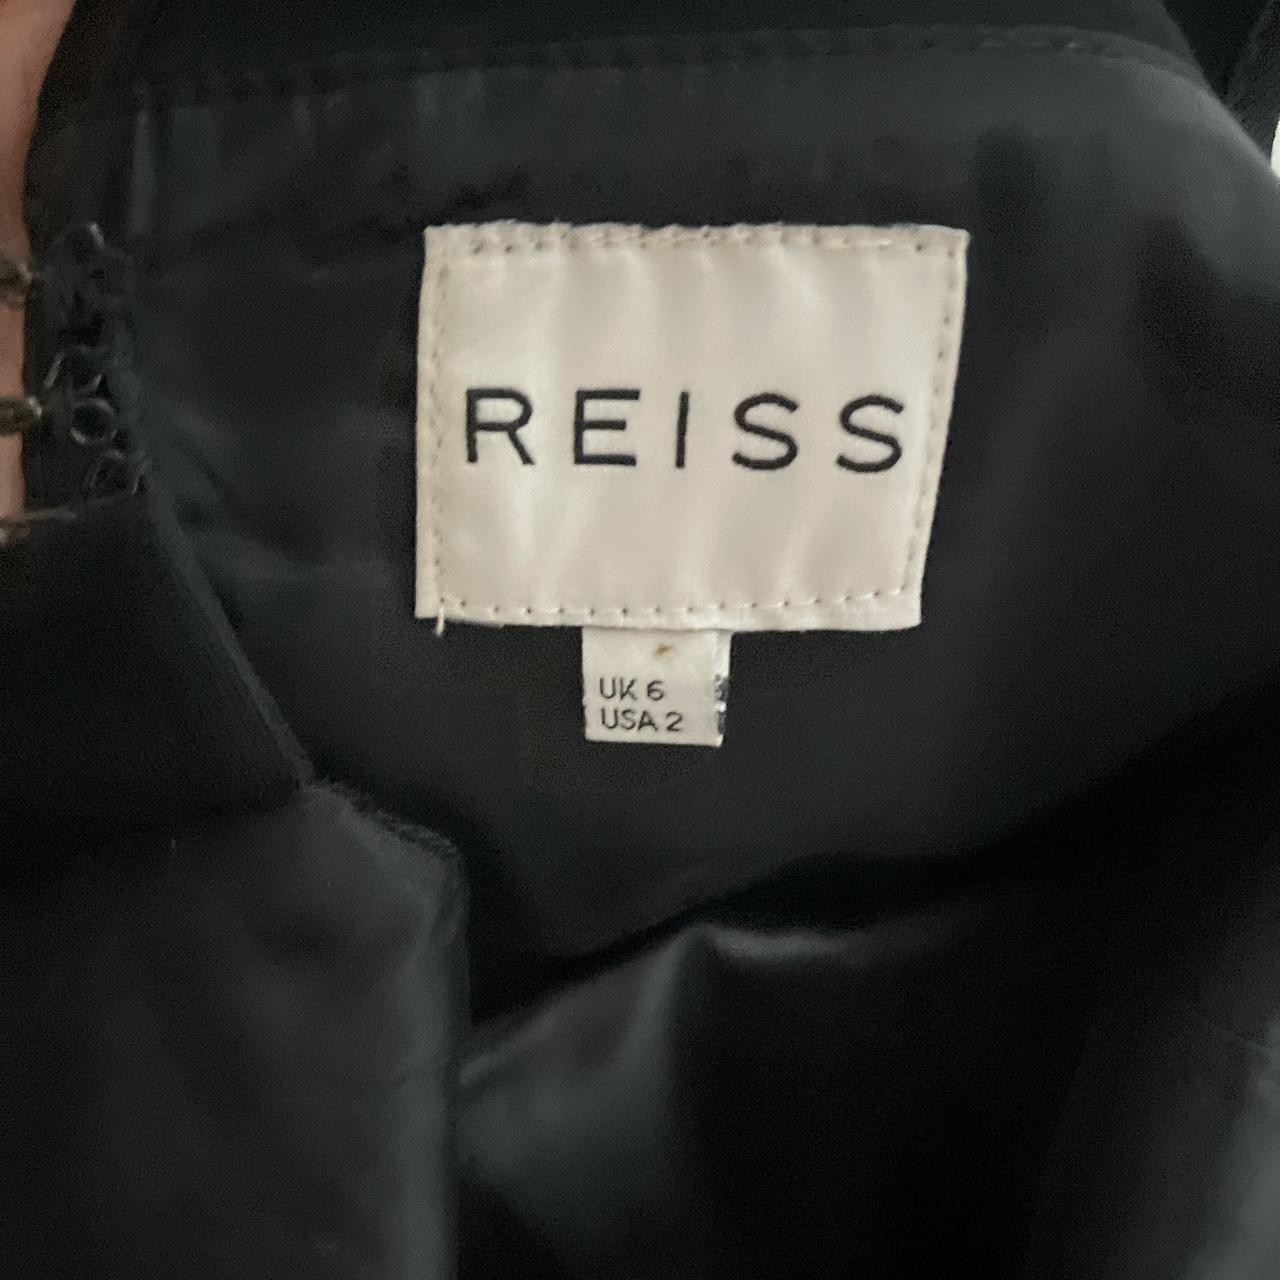 Reiss Black Dress Cut out detail at the back -... - Depop